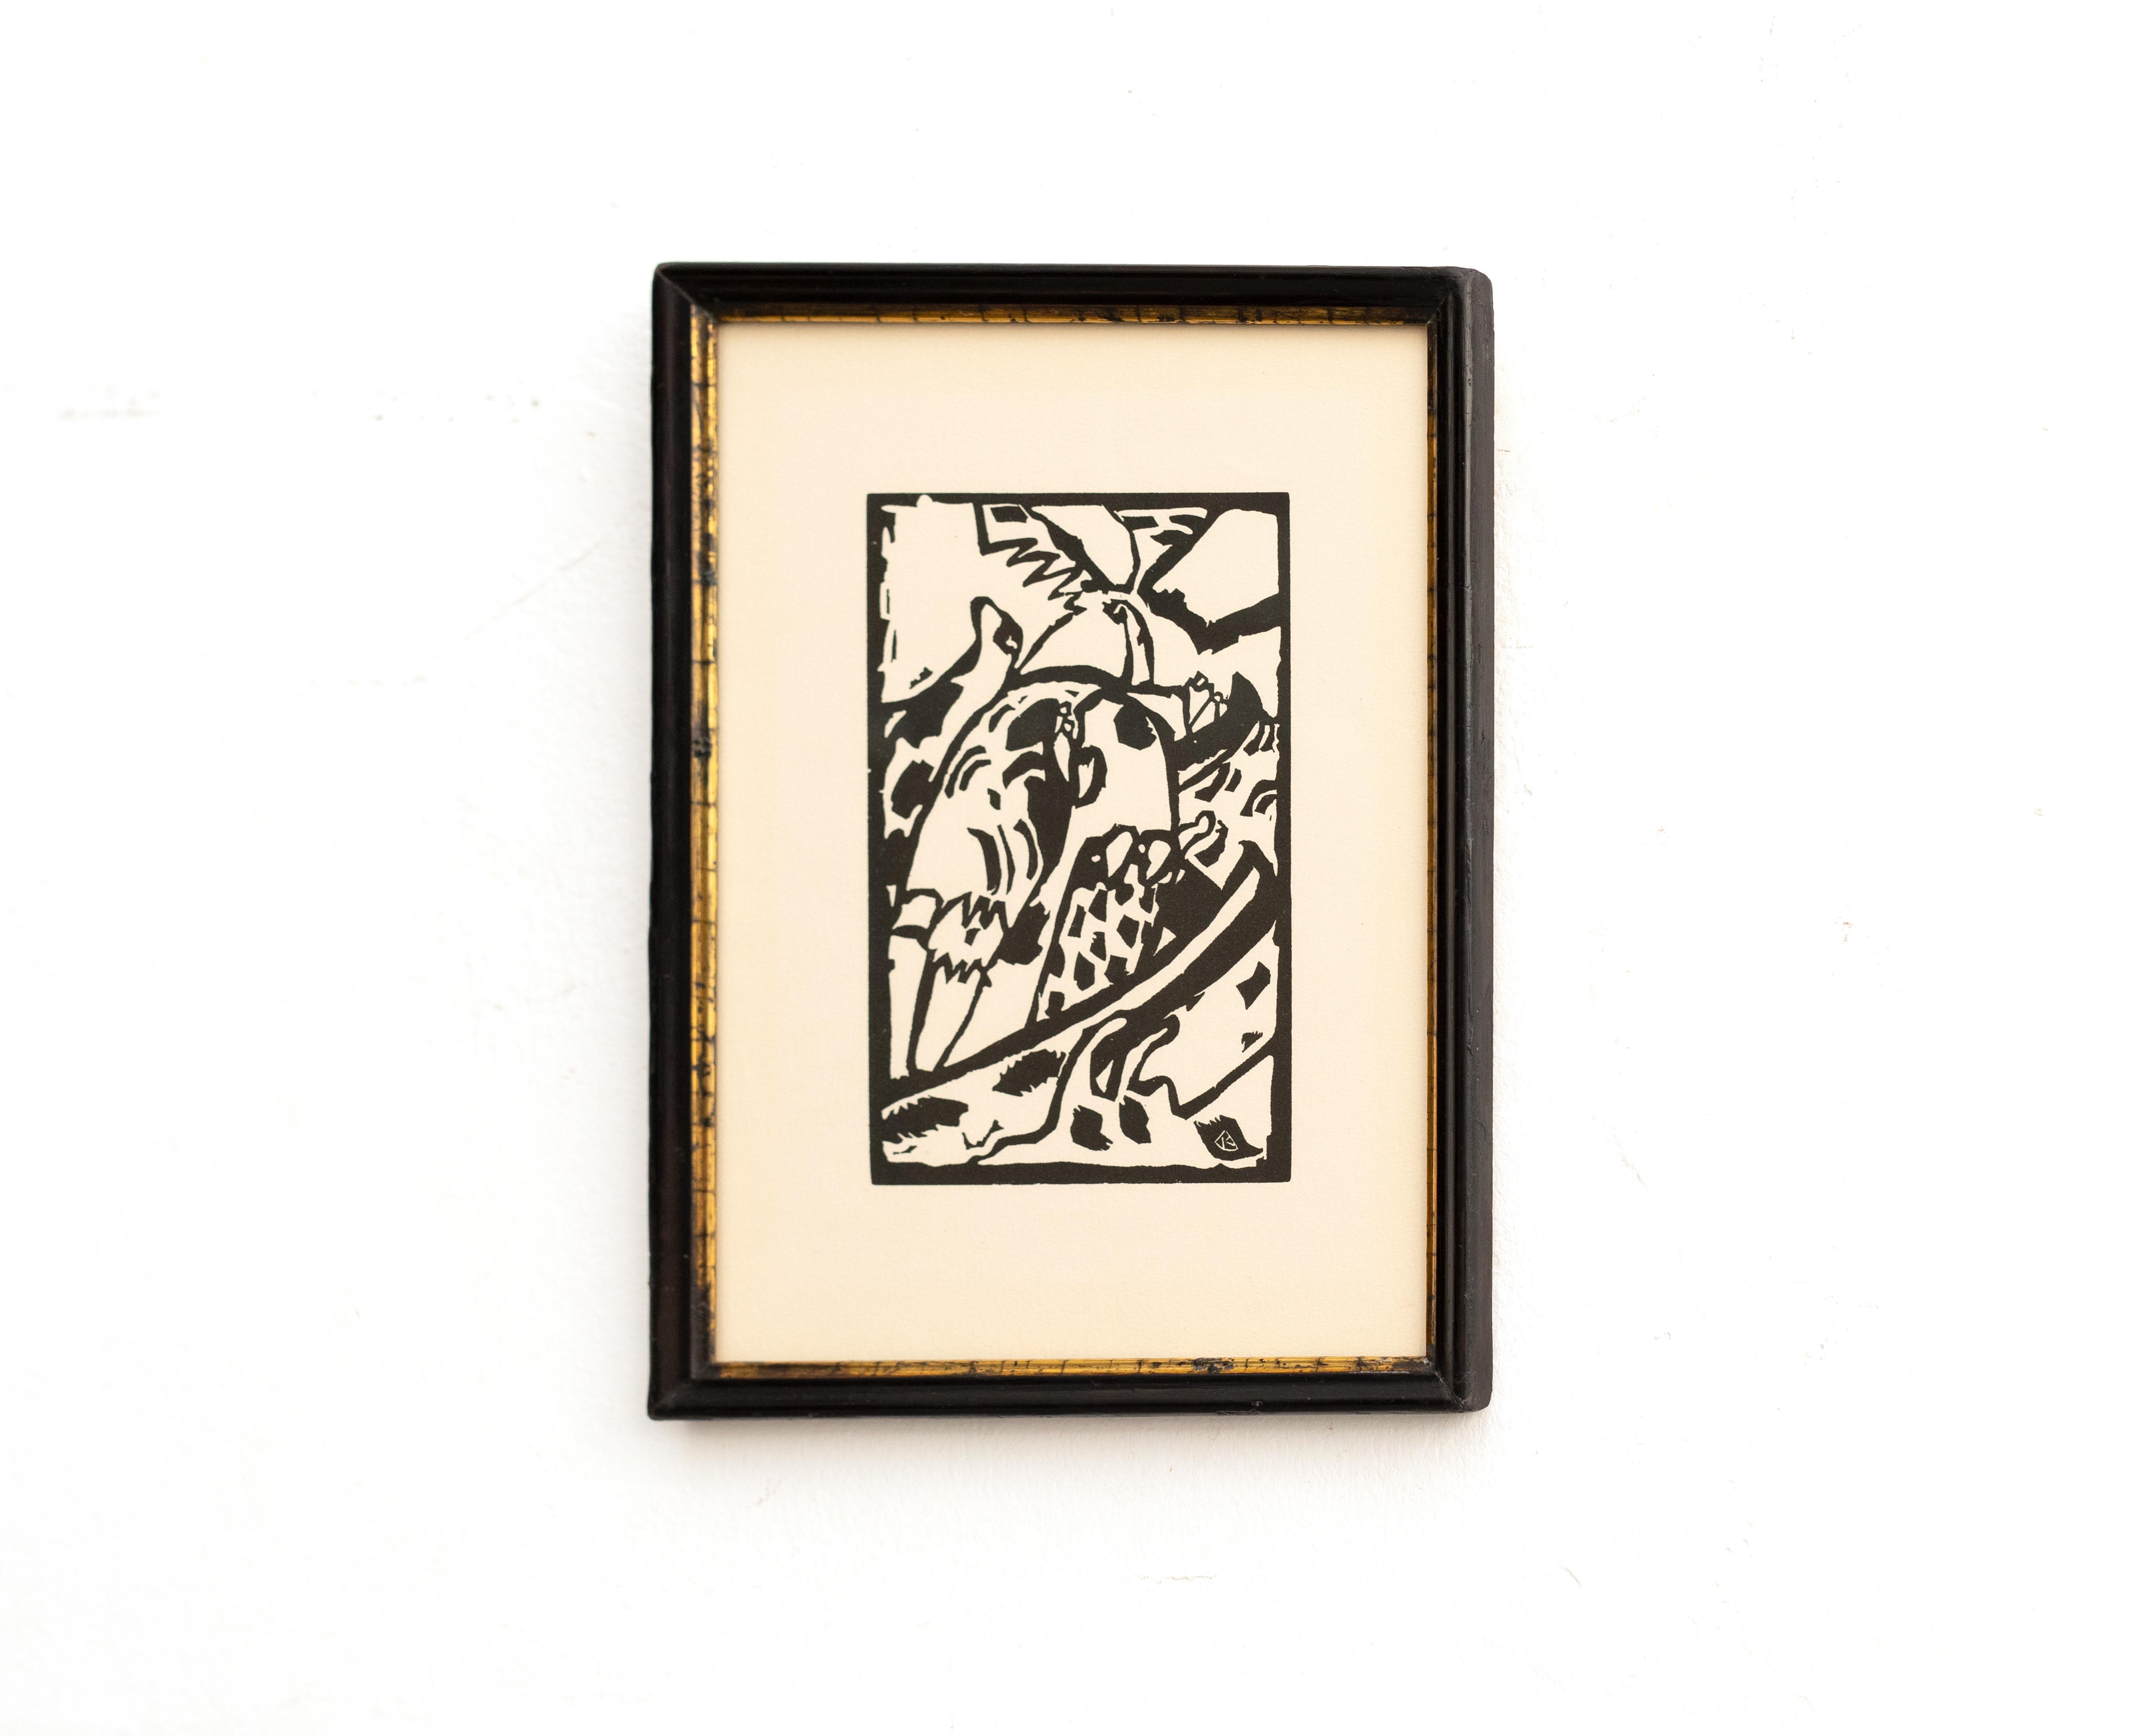 Woodcut by Wassily Kandinsky.
Wood engraving for the portfolio 